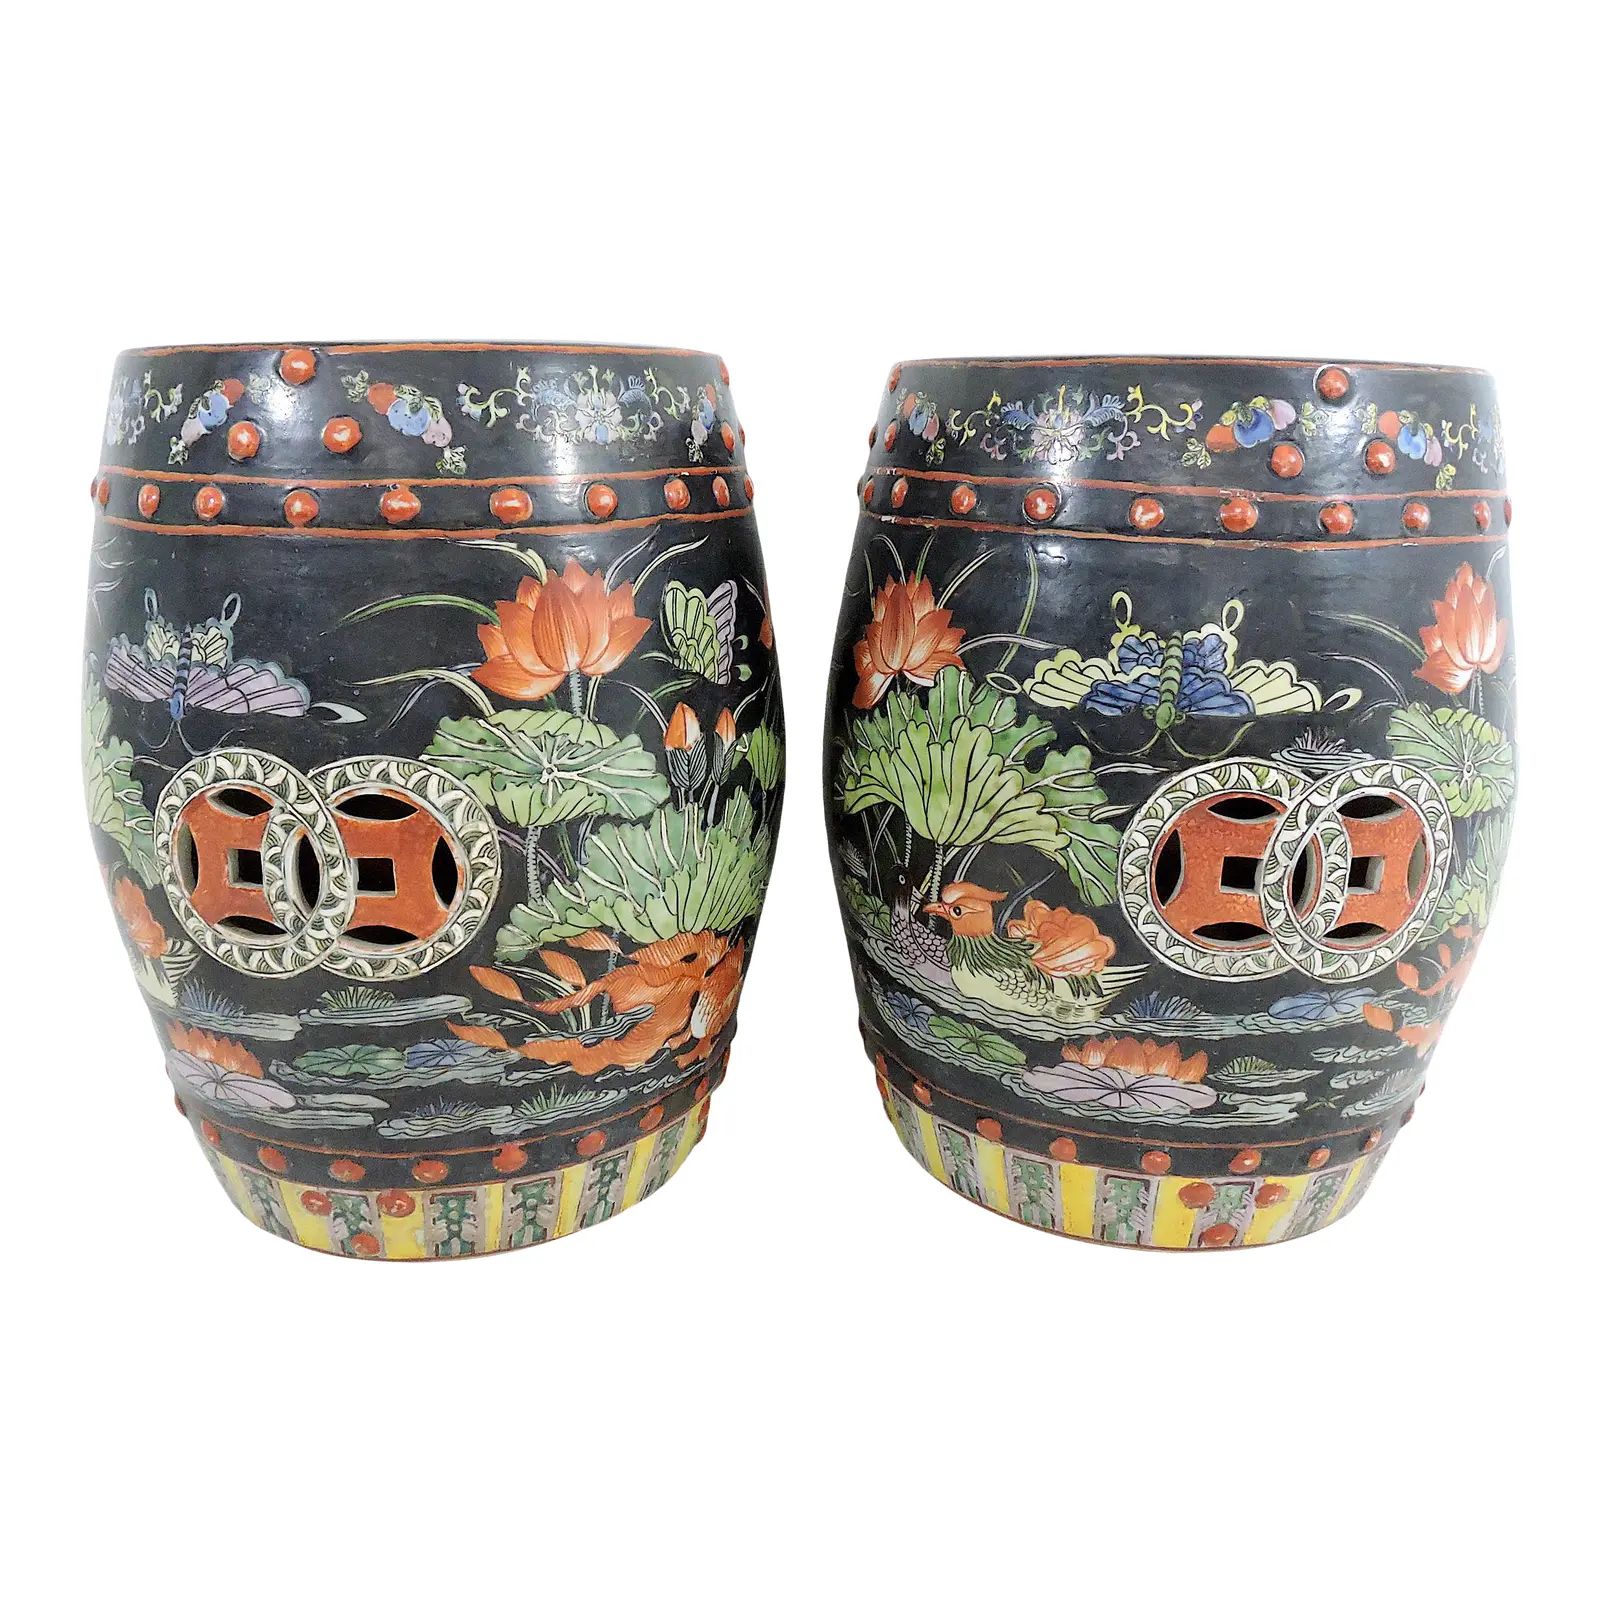 Antique Chinese Famille Noire Drum Stools With Goldfish and Lotus - a Pair (Side Tables) | Chairish